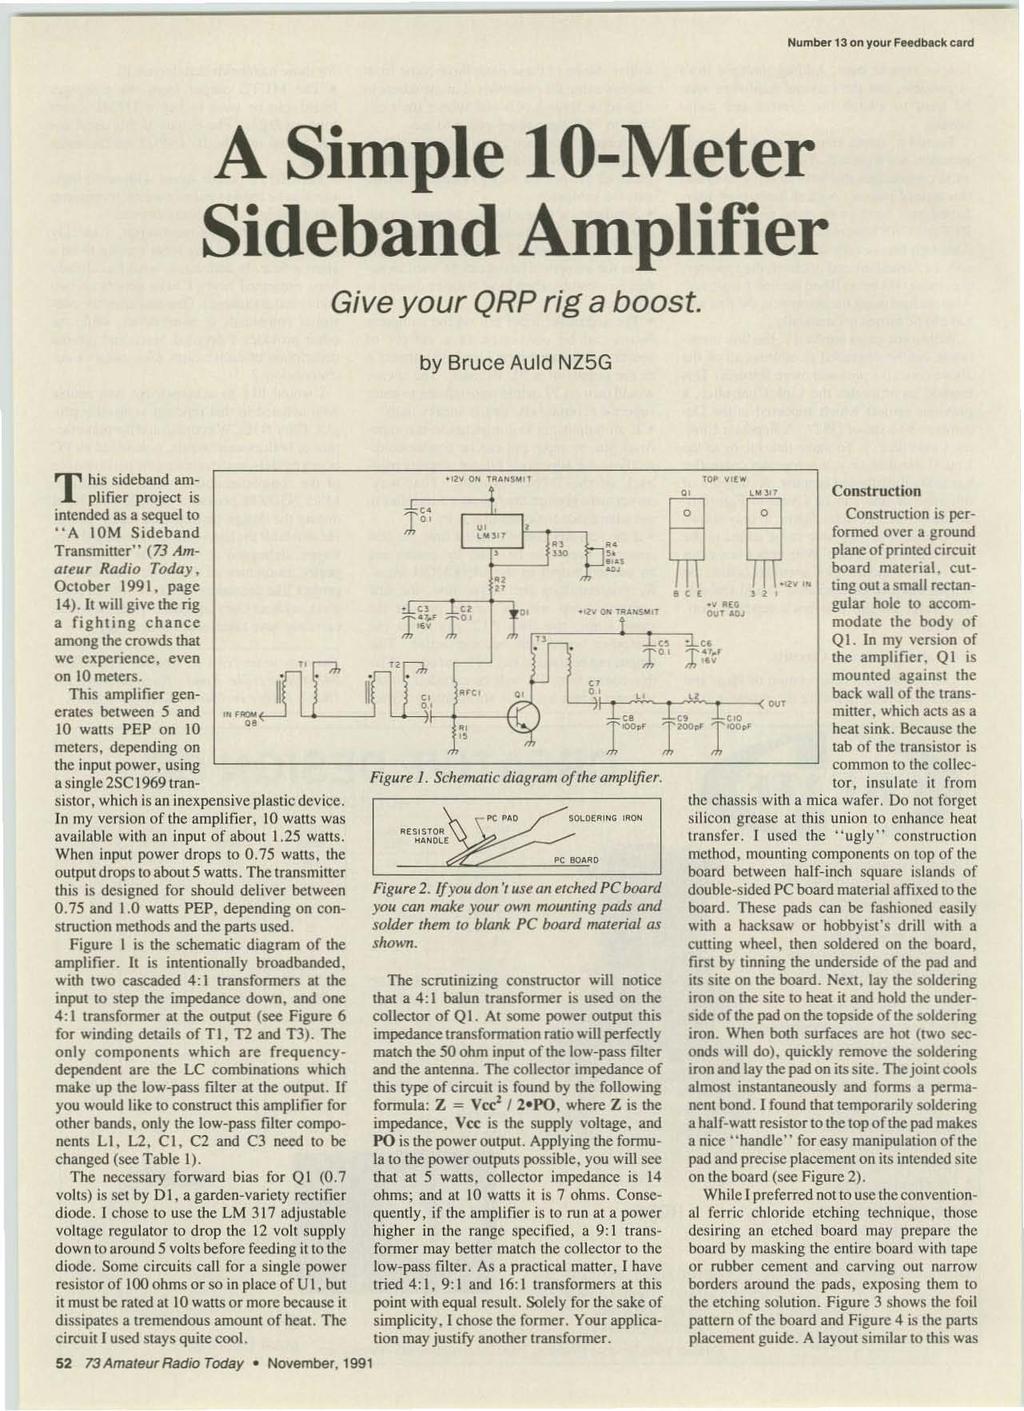 ----------------------1 Number 13 on YOu' FM'db.Kk eard A Simple to-meter Sideband Amplifier Give your QRP rig a boost. by Bruce Auld NZ5G T his sideband amplifier project is intended as a sequel to.